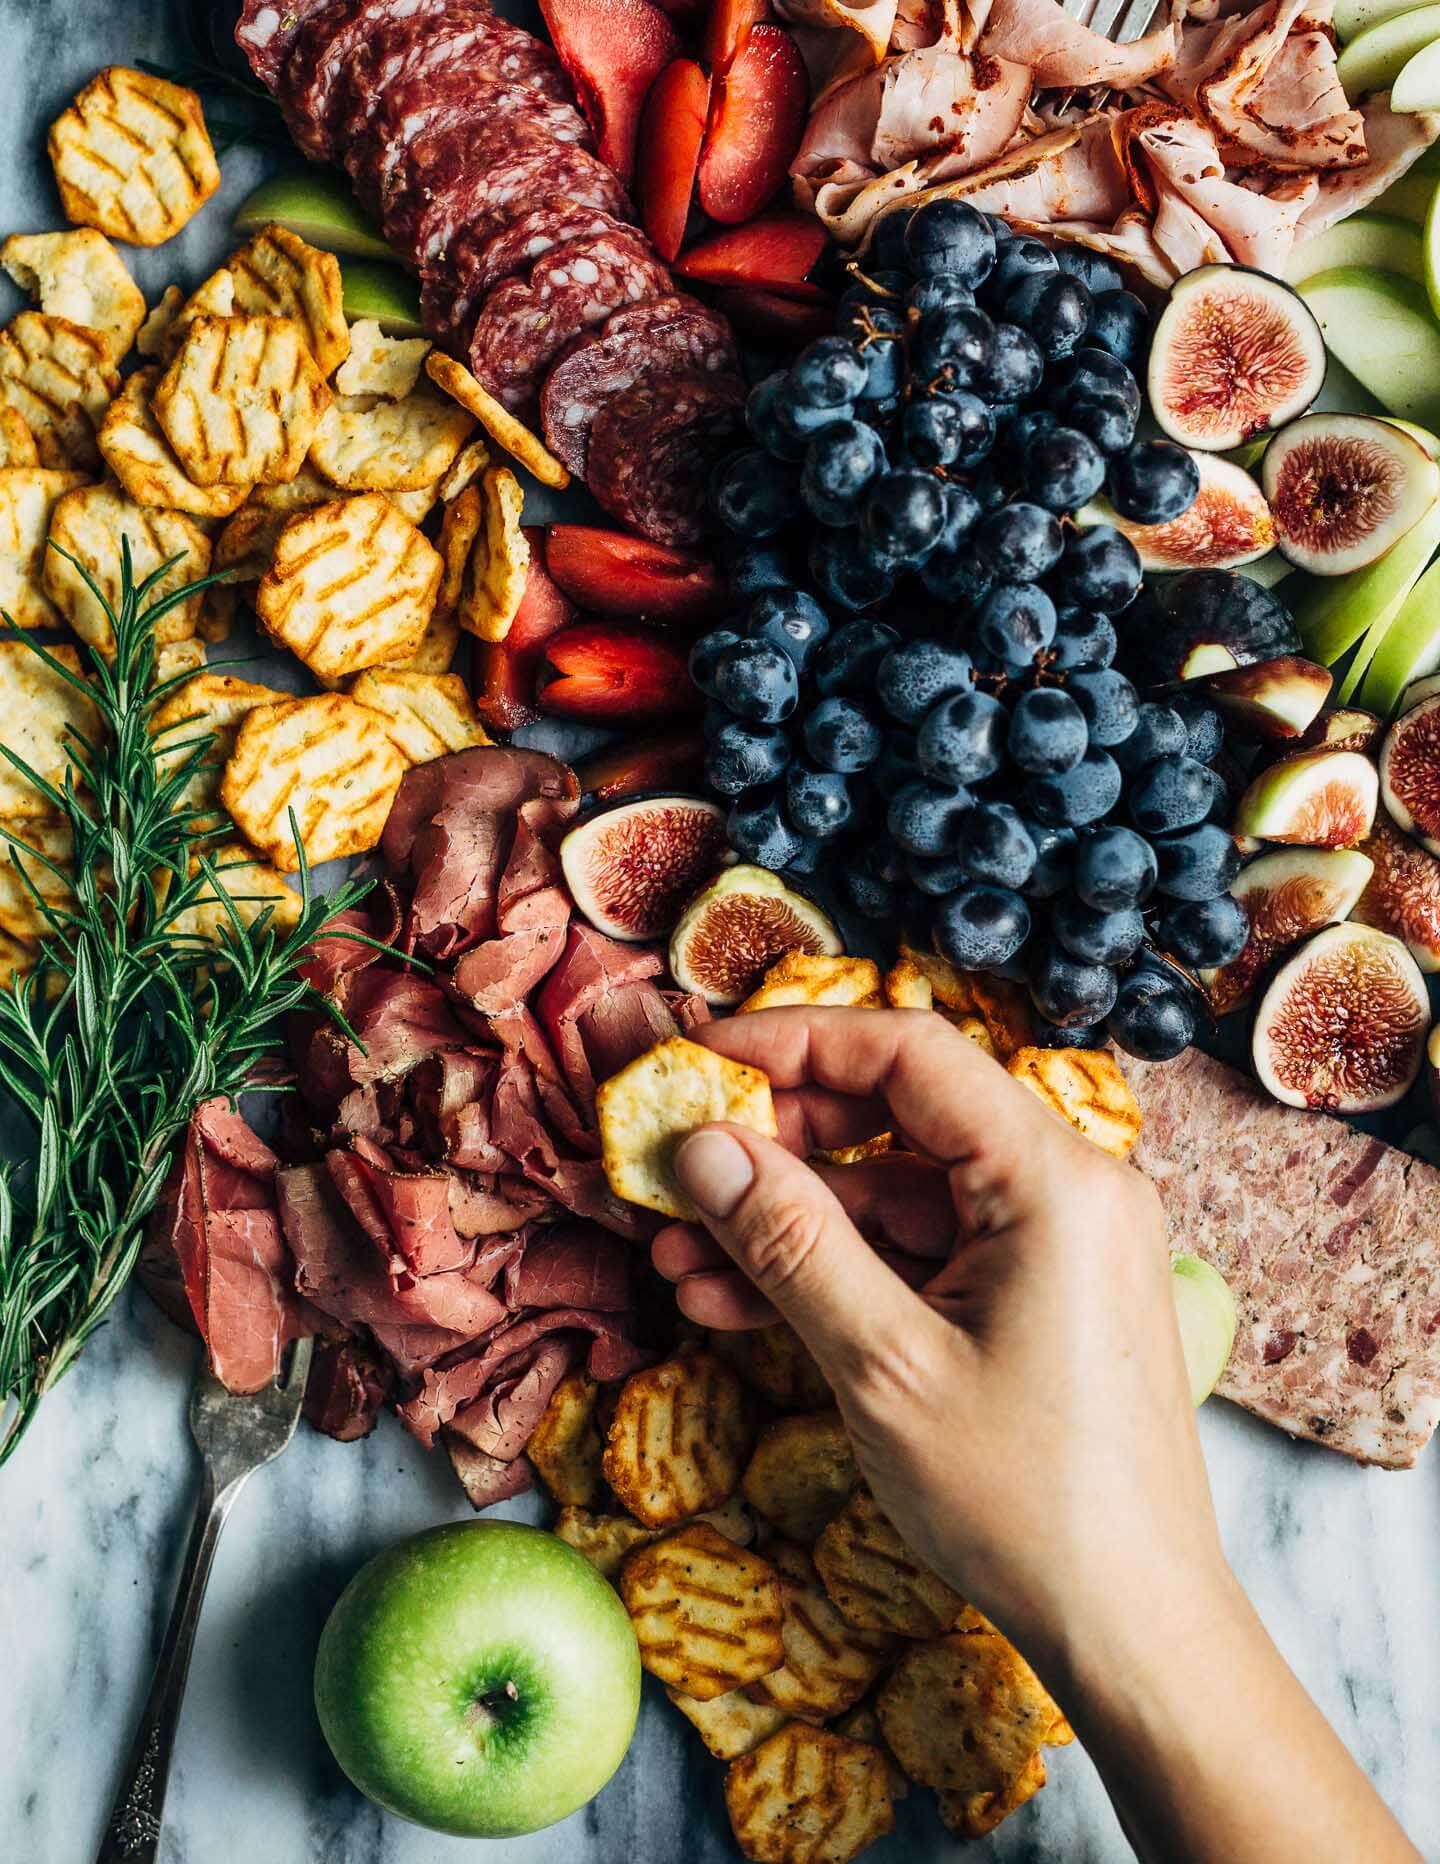 A creative charcuterie graze board that doubles as an eye-catching centerpiece for autumn gatherings. Featuring an assortment of meats, fresh fall fruit, and cheese crisps this charcuterie graze board comes together in minutes.